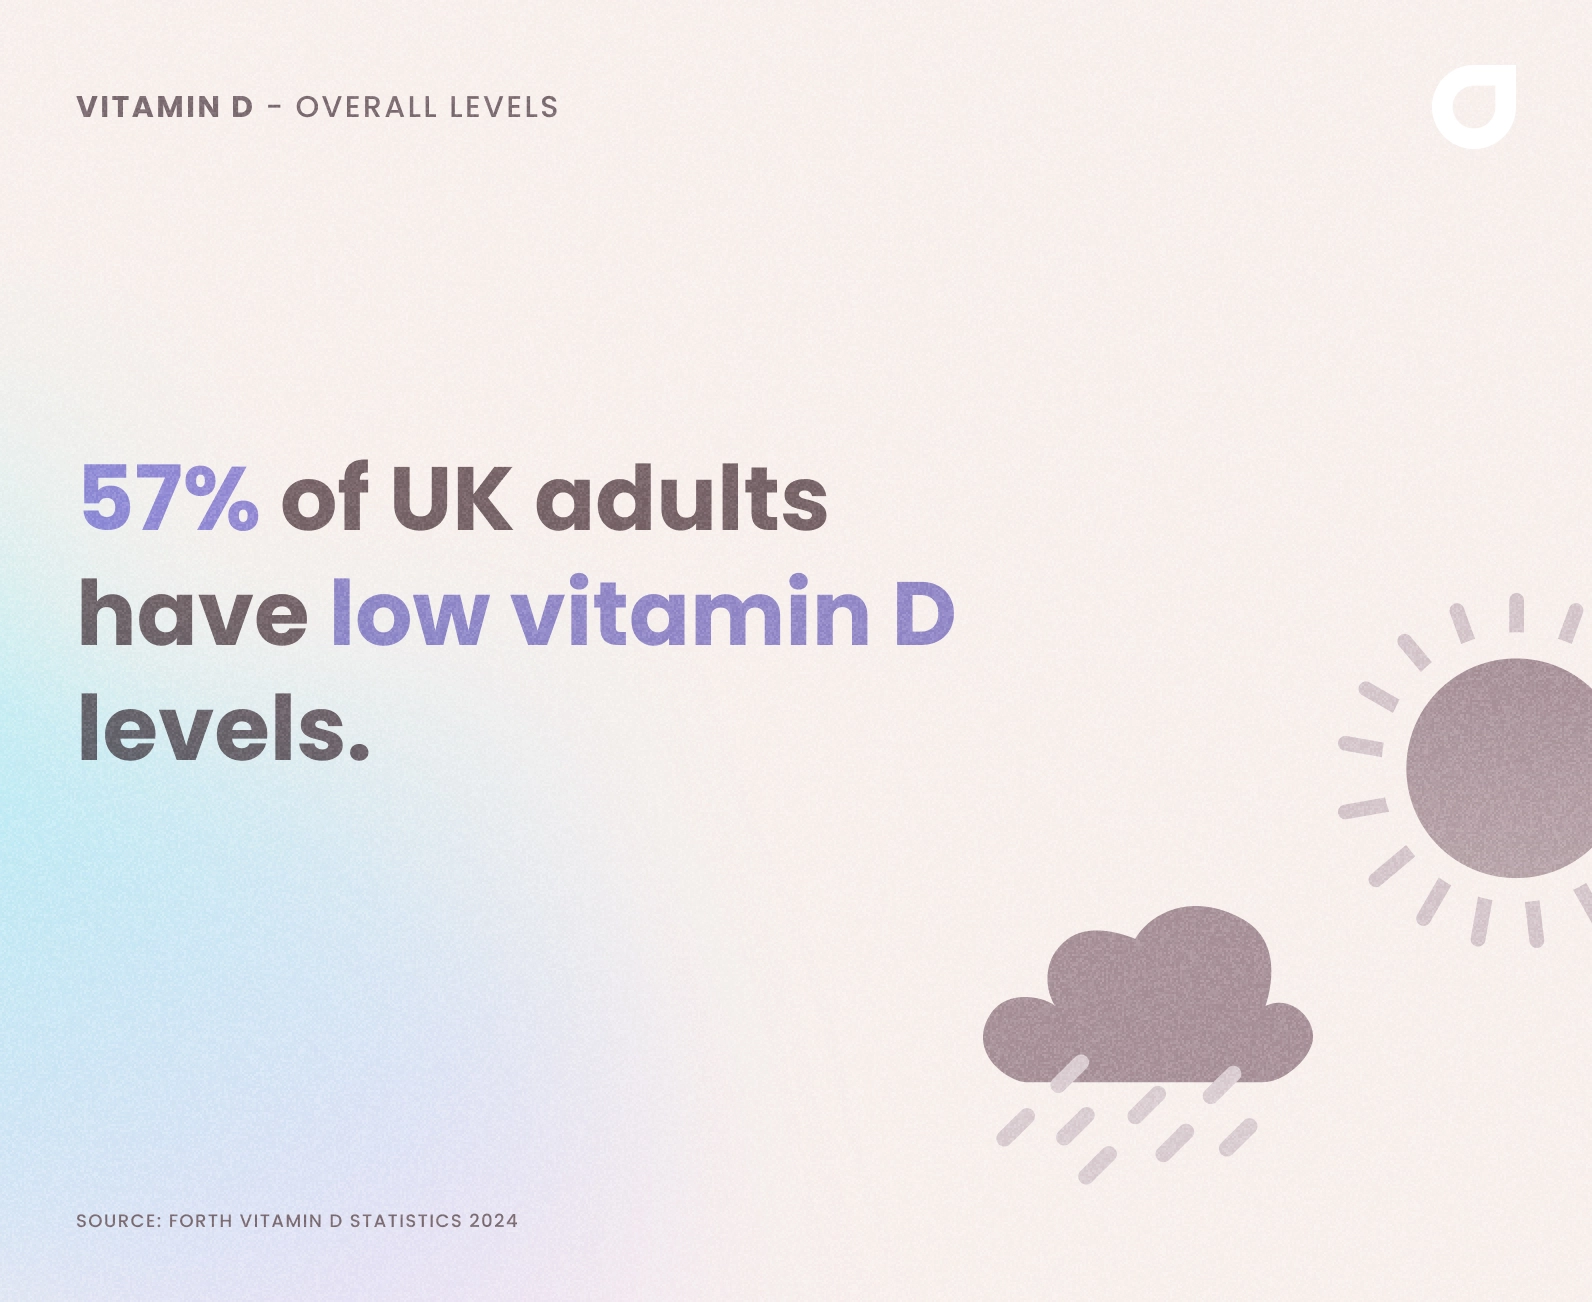 A graphic showing 57% of UK adults have low levels of vitamin D